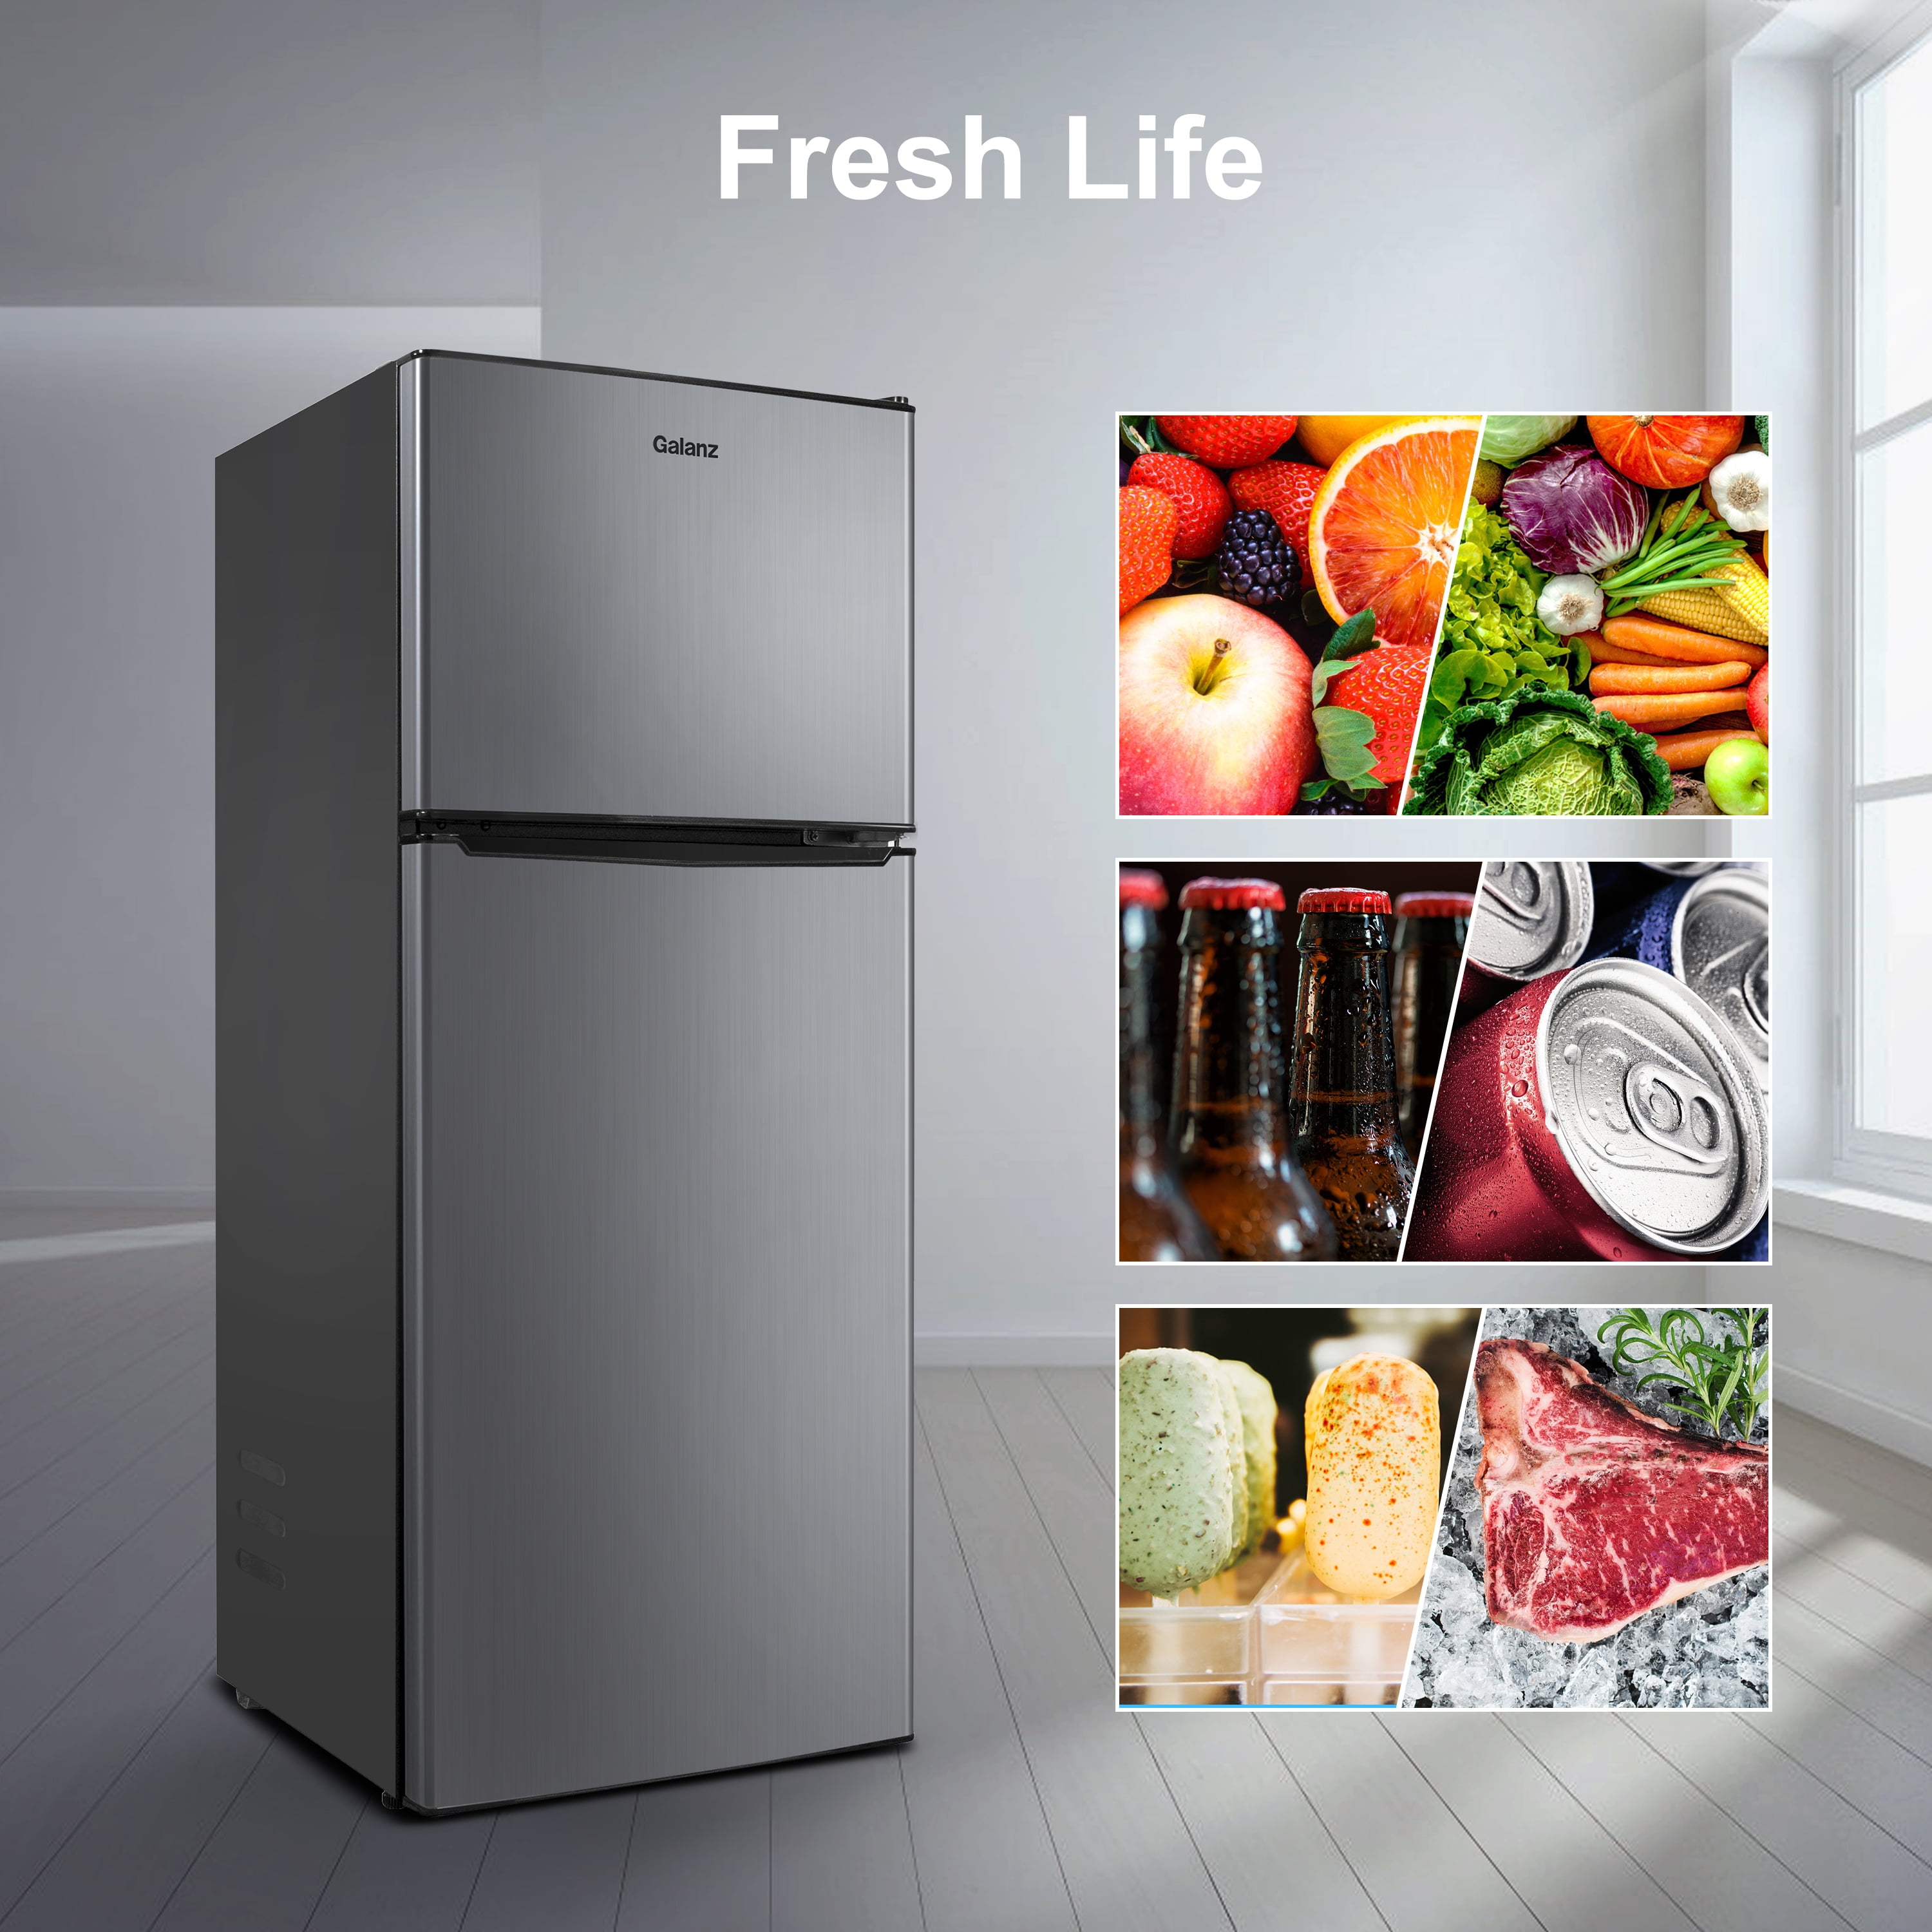 Galanz 4.6. Cu ft Two Door Mini Refrigerator with Freezer, Stainless ...